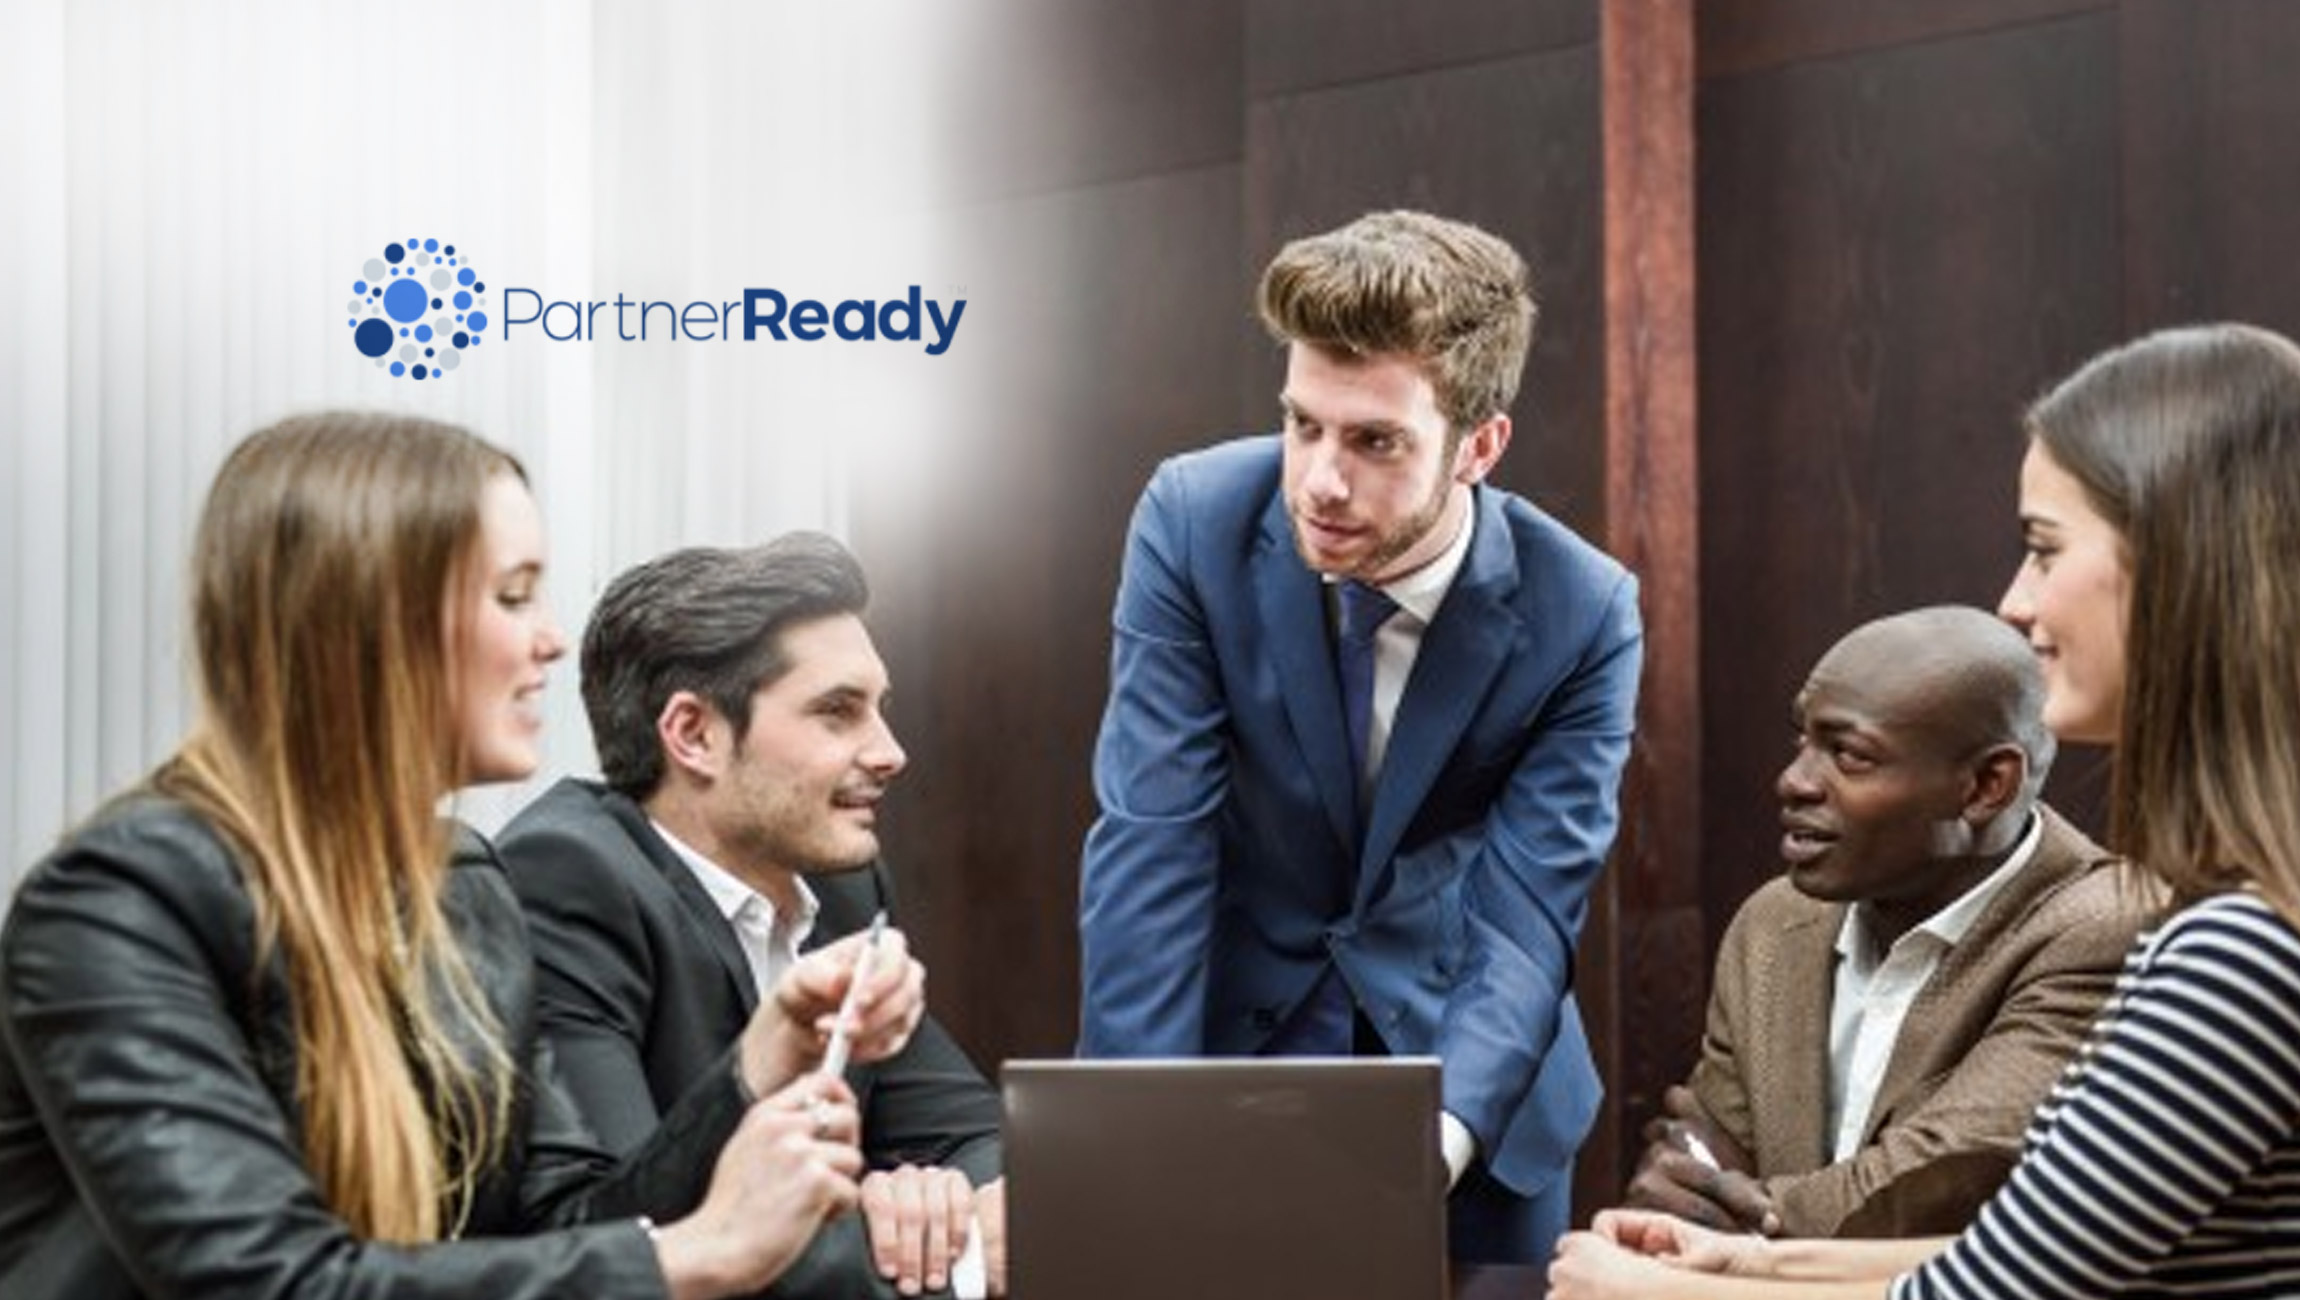 PartnerReady Expands its Fractional Partner Leadership Team to APAC